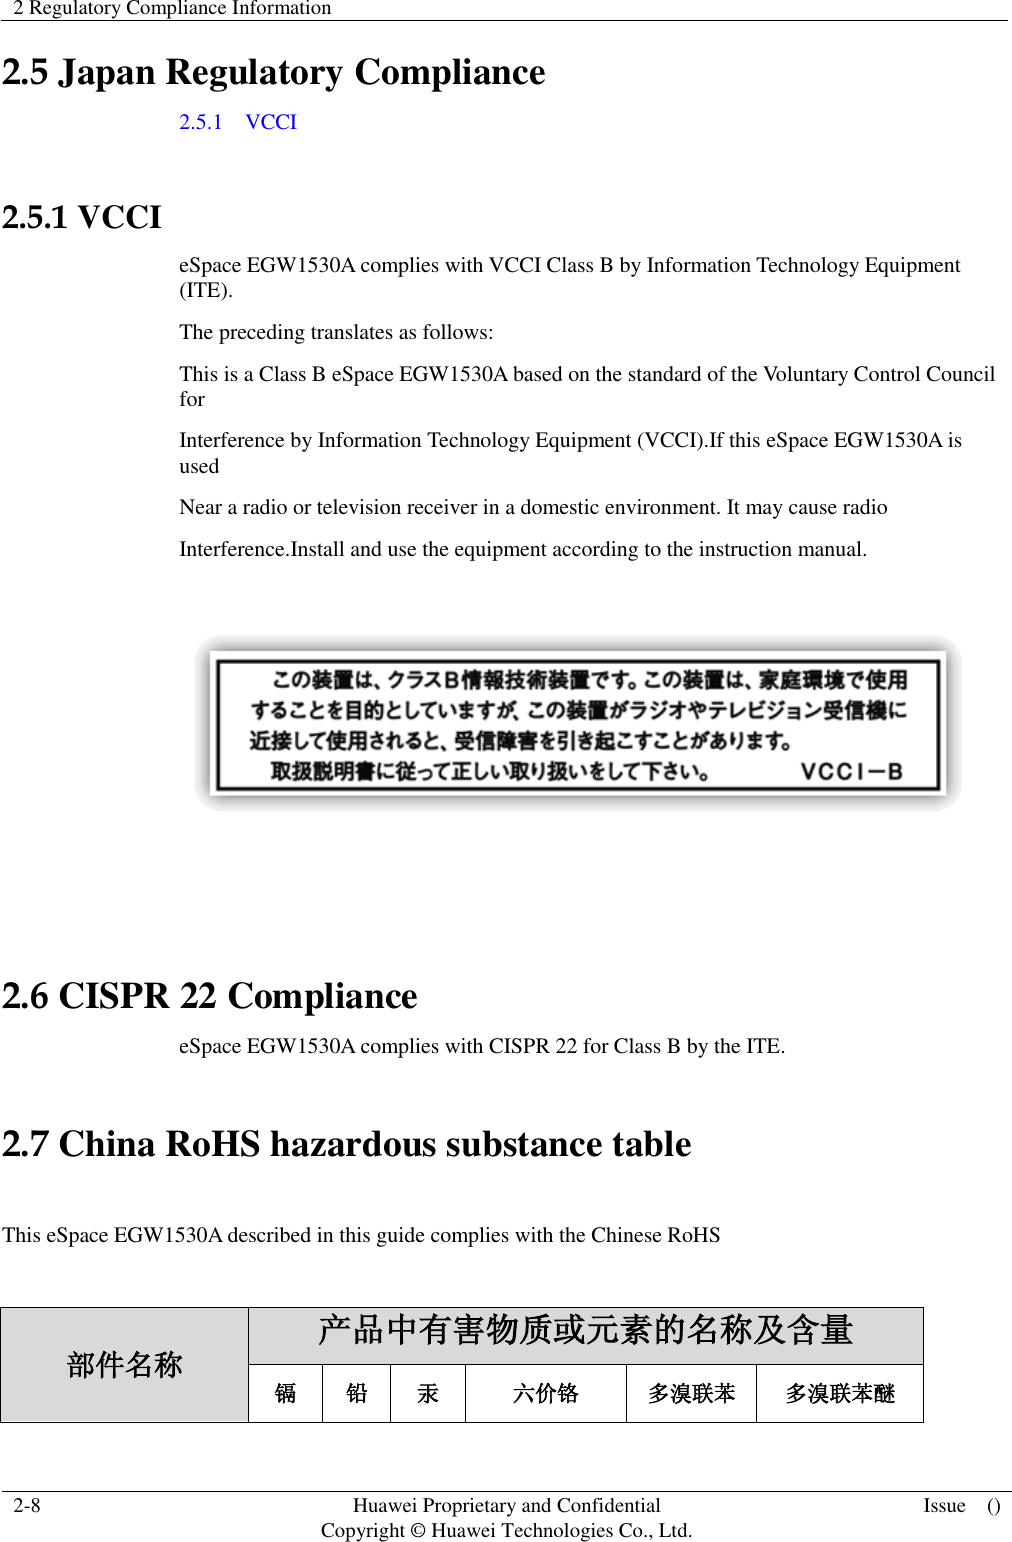 2 Regulatory Compliance Information    2-8 Huawei Proprietary and Confidential                                     Copyright © Huawei Technologies Co., Ltd. Issue    ()  2.5 Japan Regulatory Compliance 2.5.1    VCCI  2.5.1 VCCI eSpace EGW1530A complies with VCCI Class B by Information Technology Equipment (ITE). The preceding translates as follows: This is a Class B eSpace EGW1530A based on the standard of the Voluntary Control Council for Interference by Information Technology Equipment (VCCI).If this eSpace EGW1530A is used Near a radio or television receiver in a domestic environment. It may cause radio Interference.Install and use the equipment according to the instruction manual.     2.6 CISPR 22 Compliance eSpace EGW1530A complies with CISPR 22 for Class B by the ITE. 2.7 China RoHS hazardous substance table  This eSpace EGW1530A described in this guide complies with the Chinese RoHS  部件名称 产品中有害物质或元素的名称及含量 镉 铅 汞 六价铬 多溴联苯 多溴联苯醚 